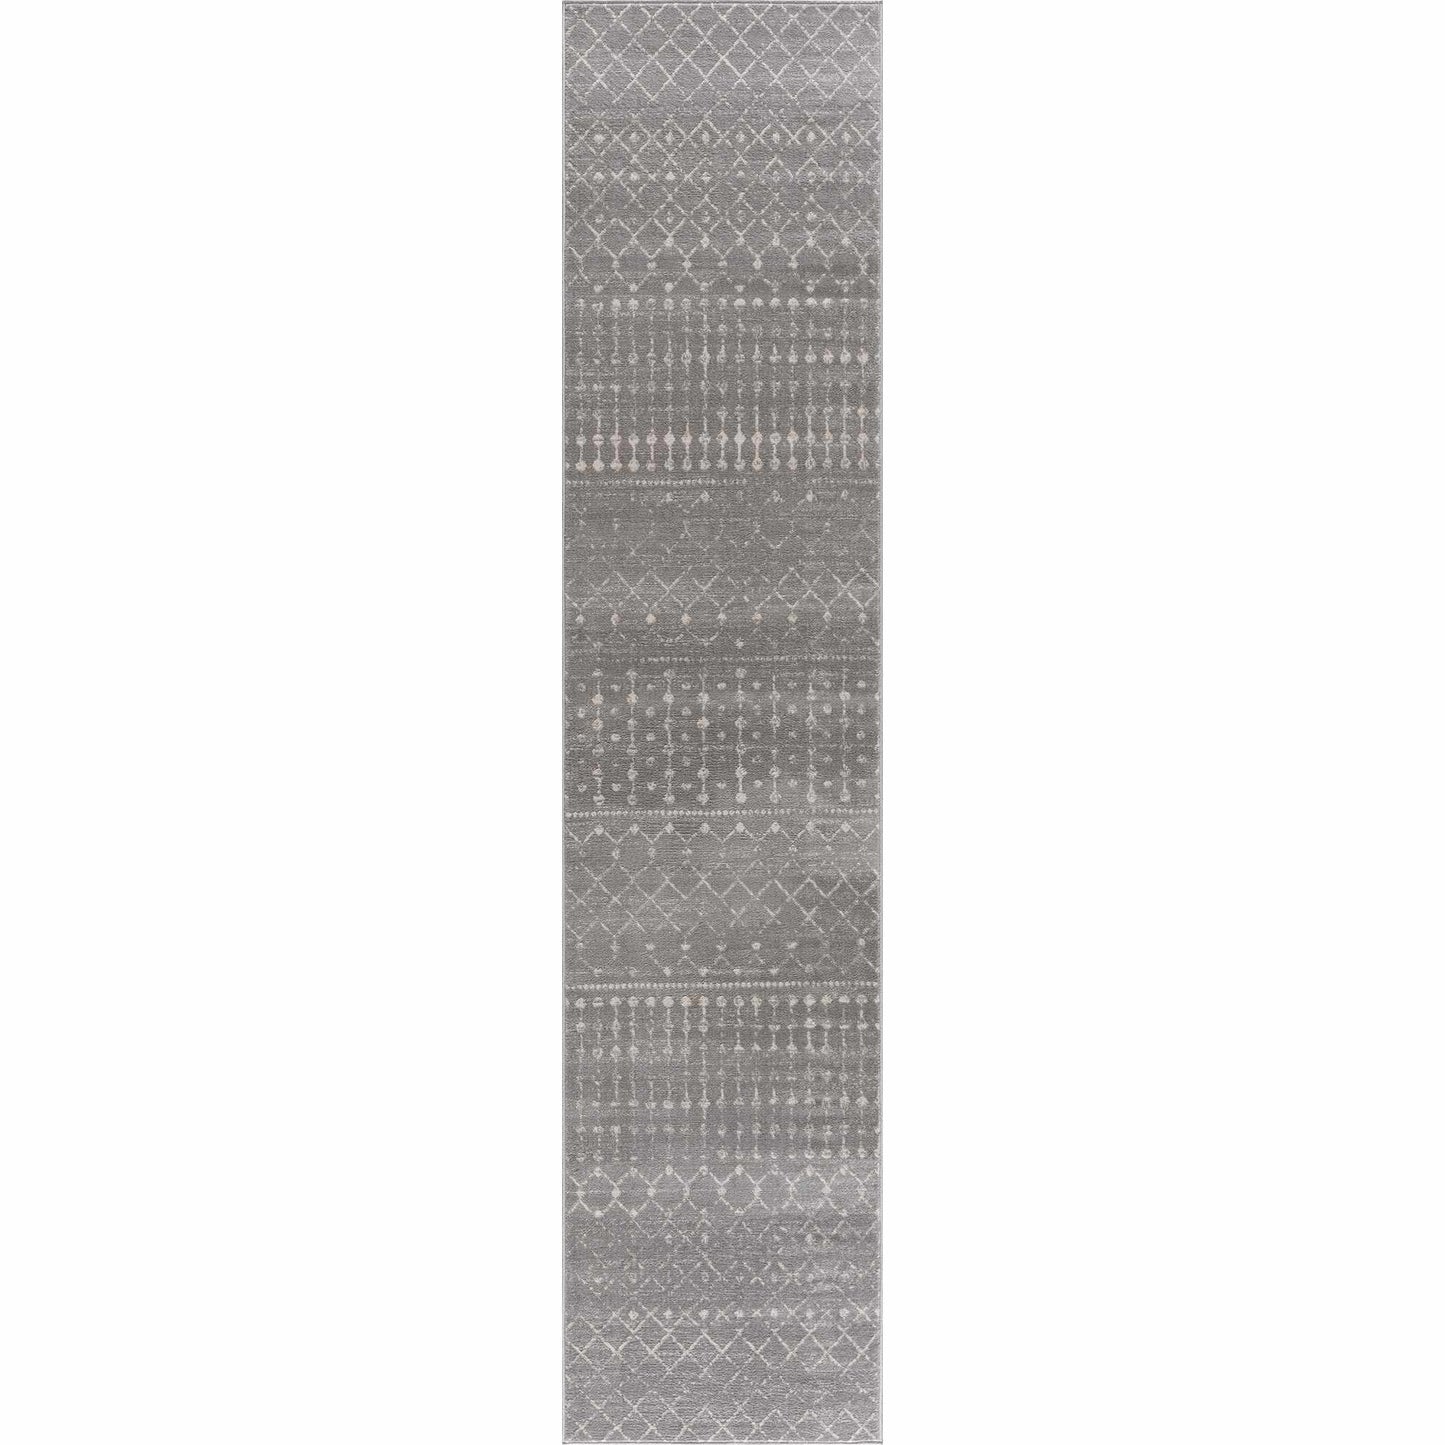 Boutique Rugs Rugs 2'7" x 10' Runner Tigrican Light Gray 2334 Area Rug